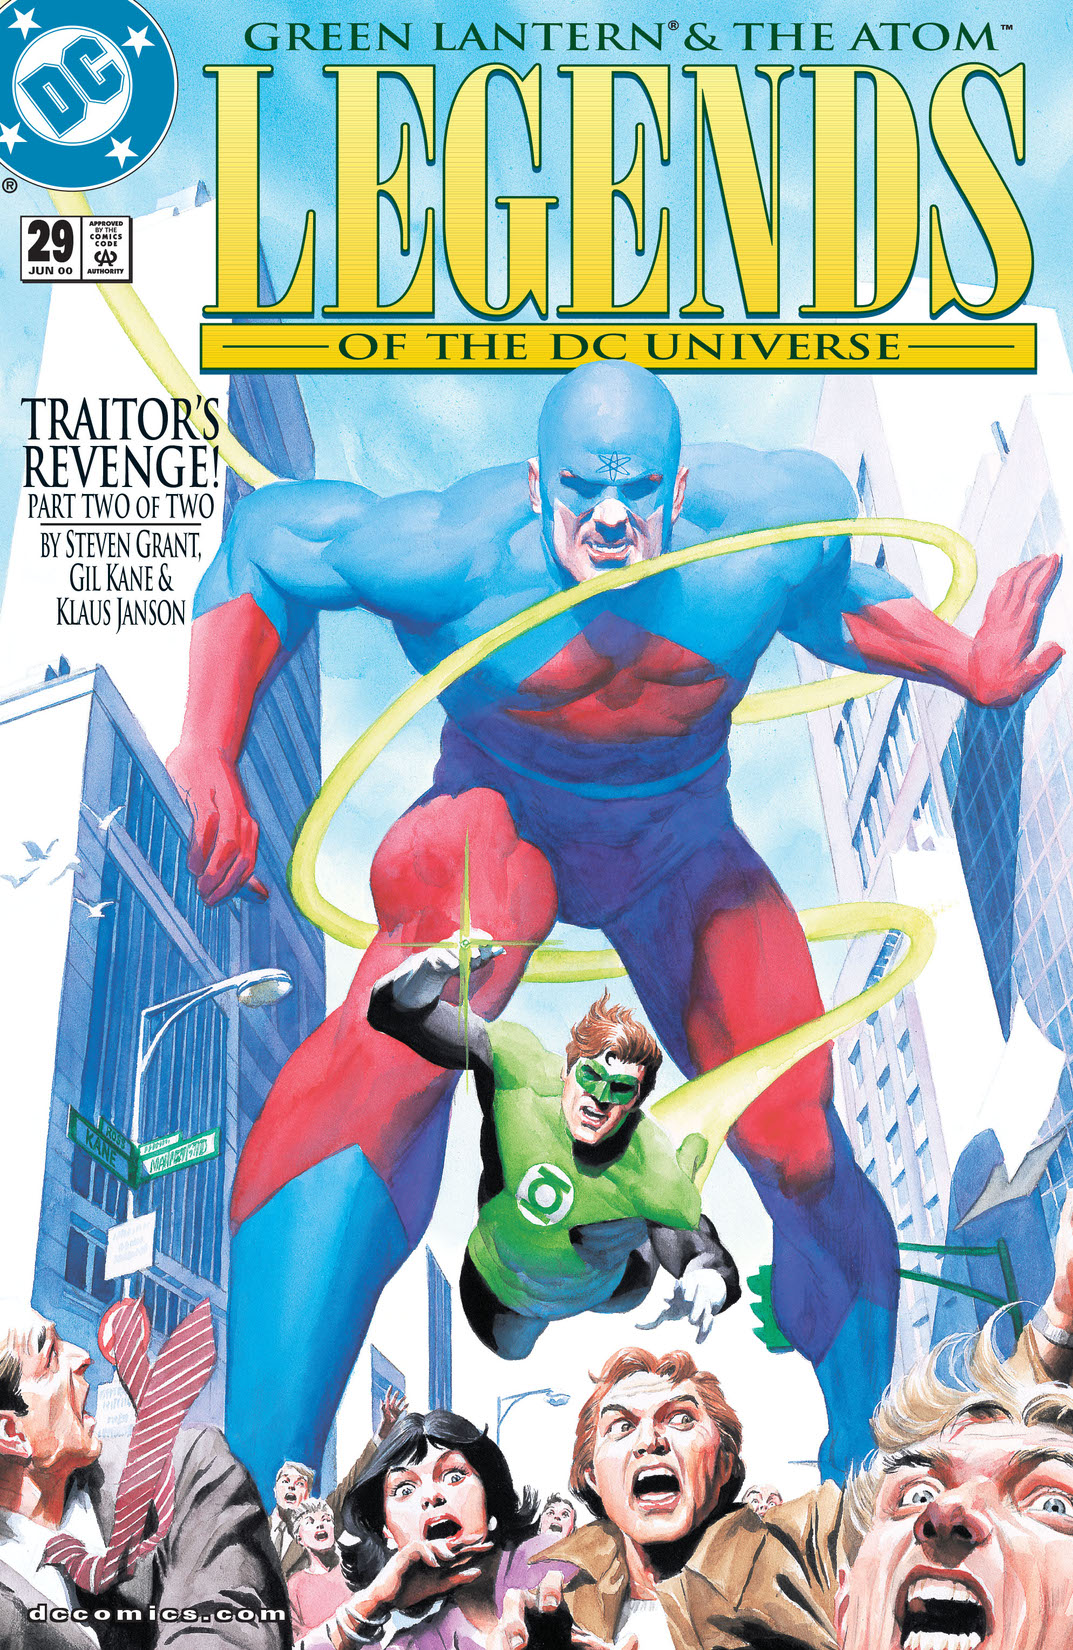 Legends of the DC Universe #29 preview images